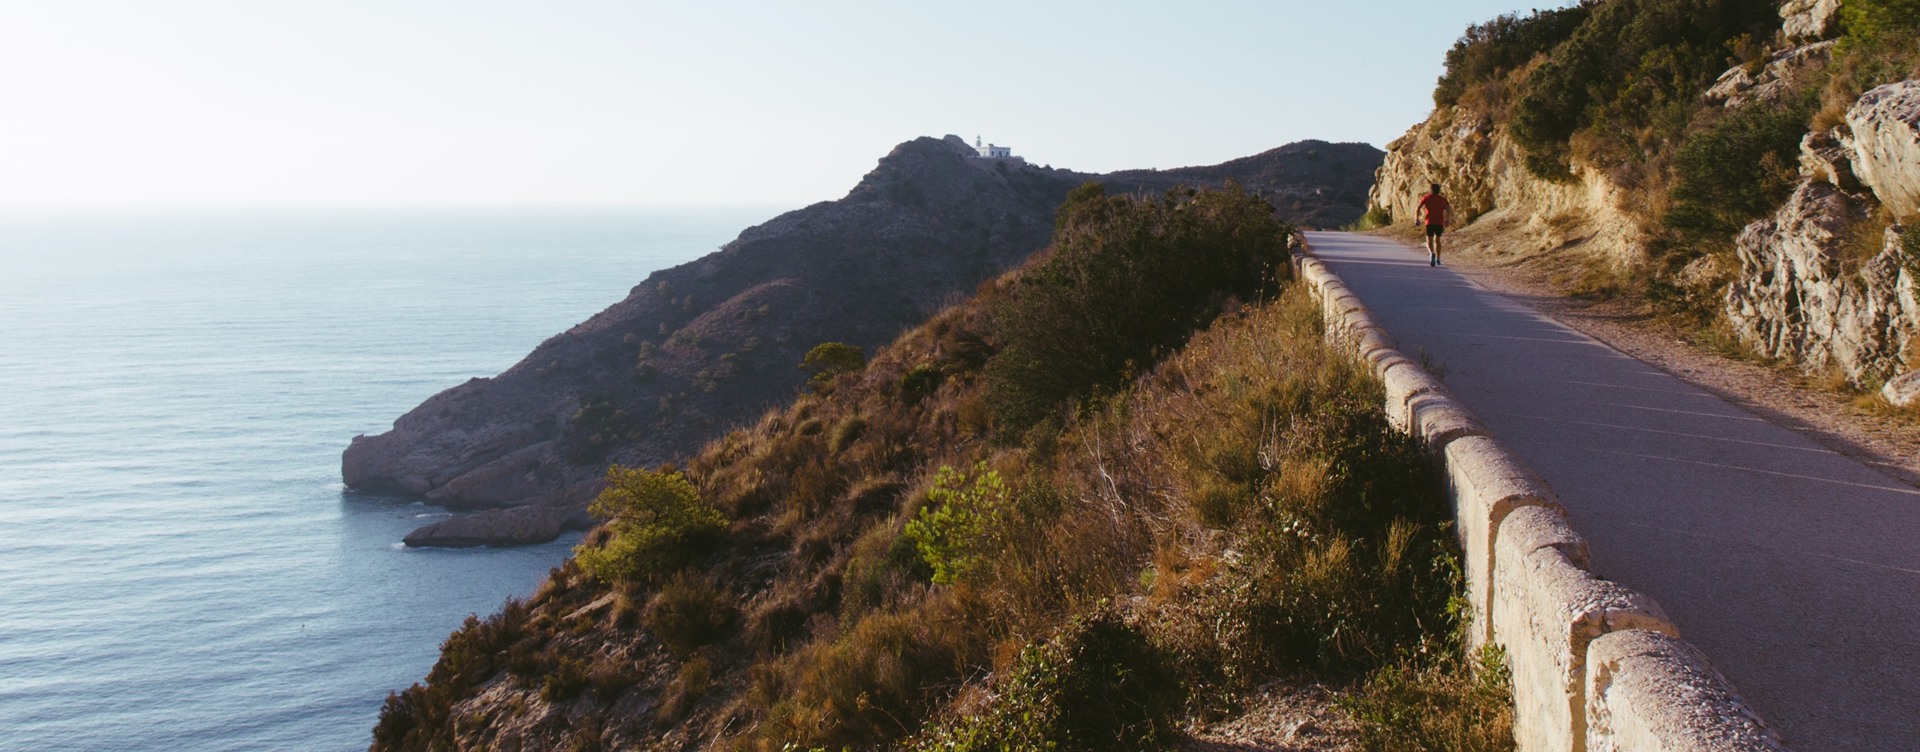 Discover the beautiful unspoilt nature
on the Costa Blanca via these special routes